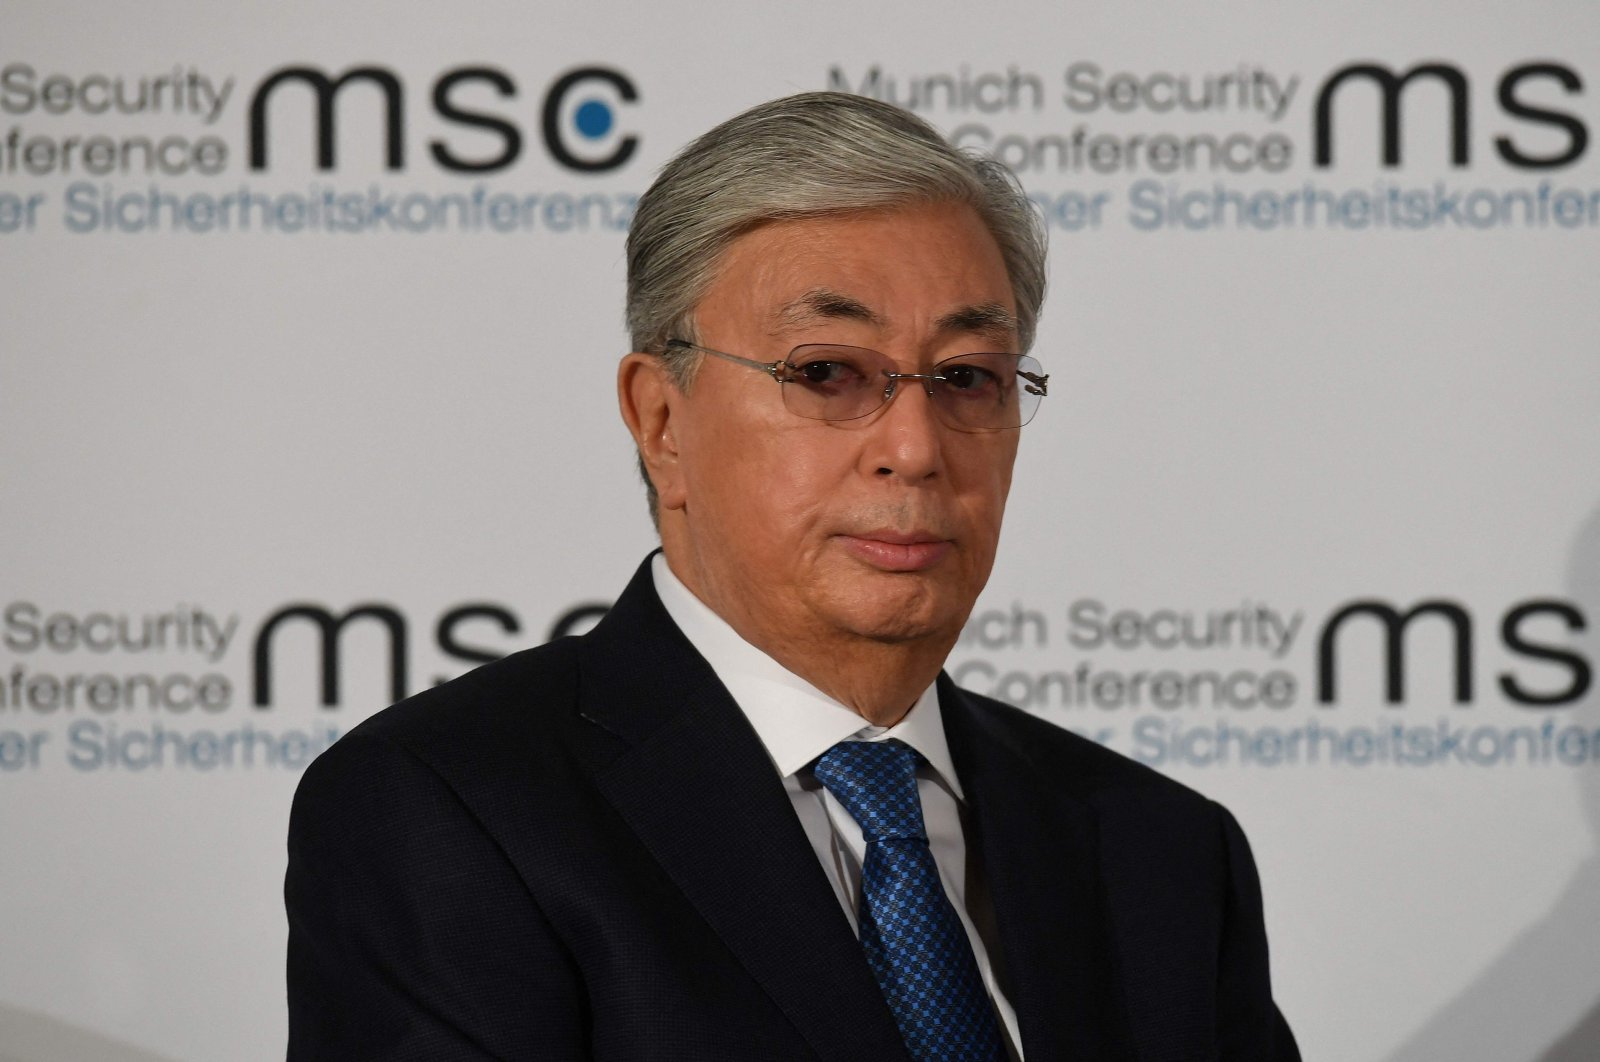 Kazakh President Kassym-Jomart Tokayev takes part in a panel discussion during the 56th Munich Security Conference (MSC) in Munich, southern Germany, Feb. 15, 2020. (AFP File Photo)